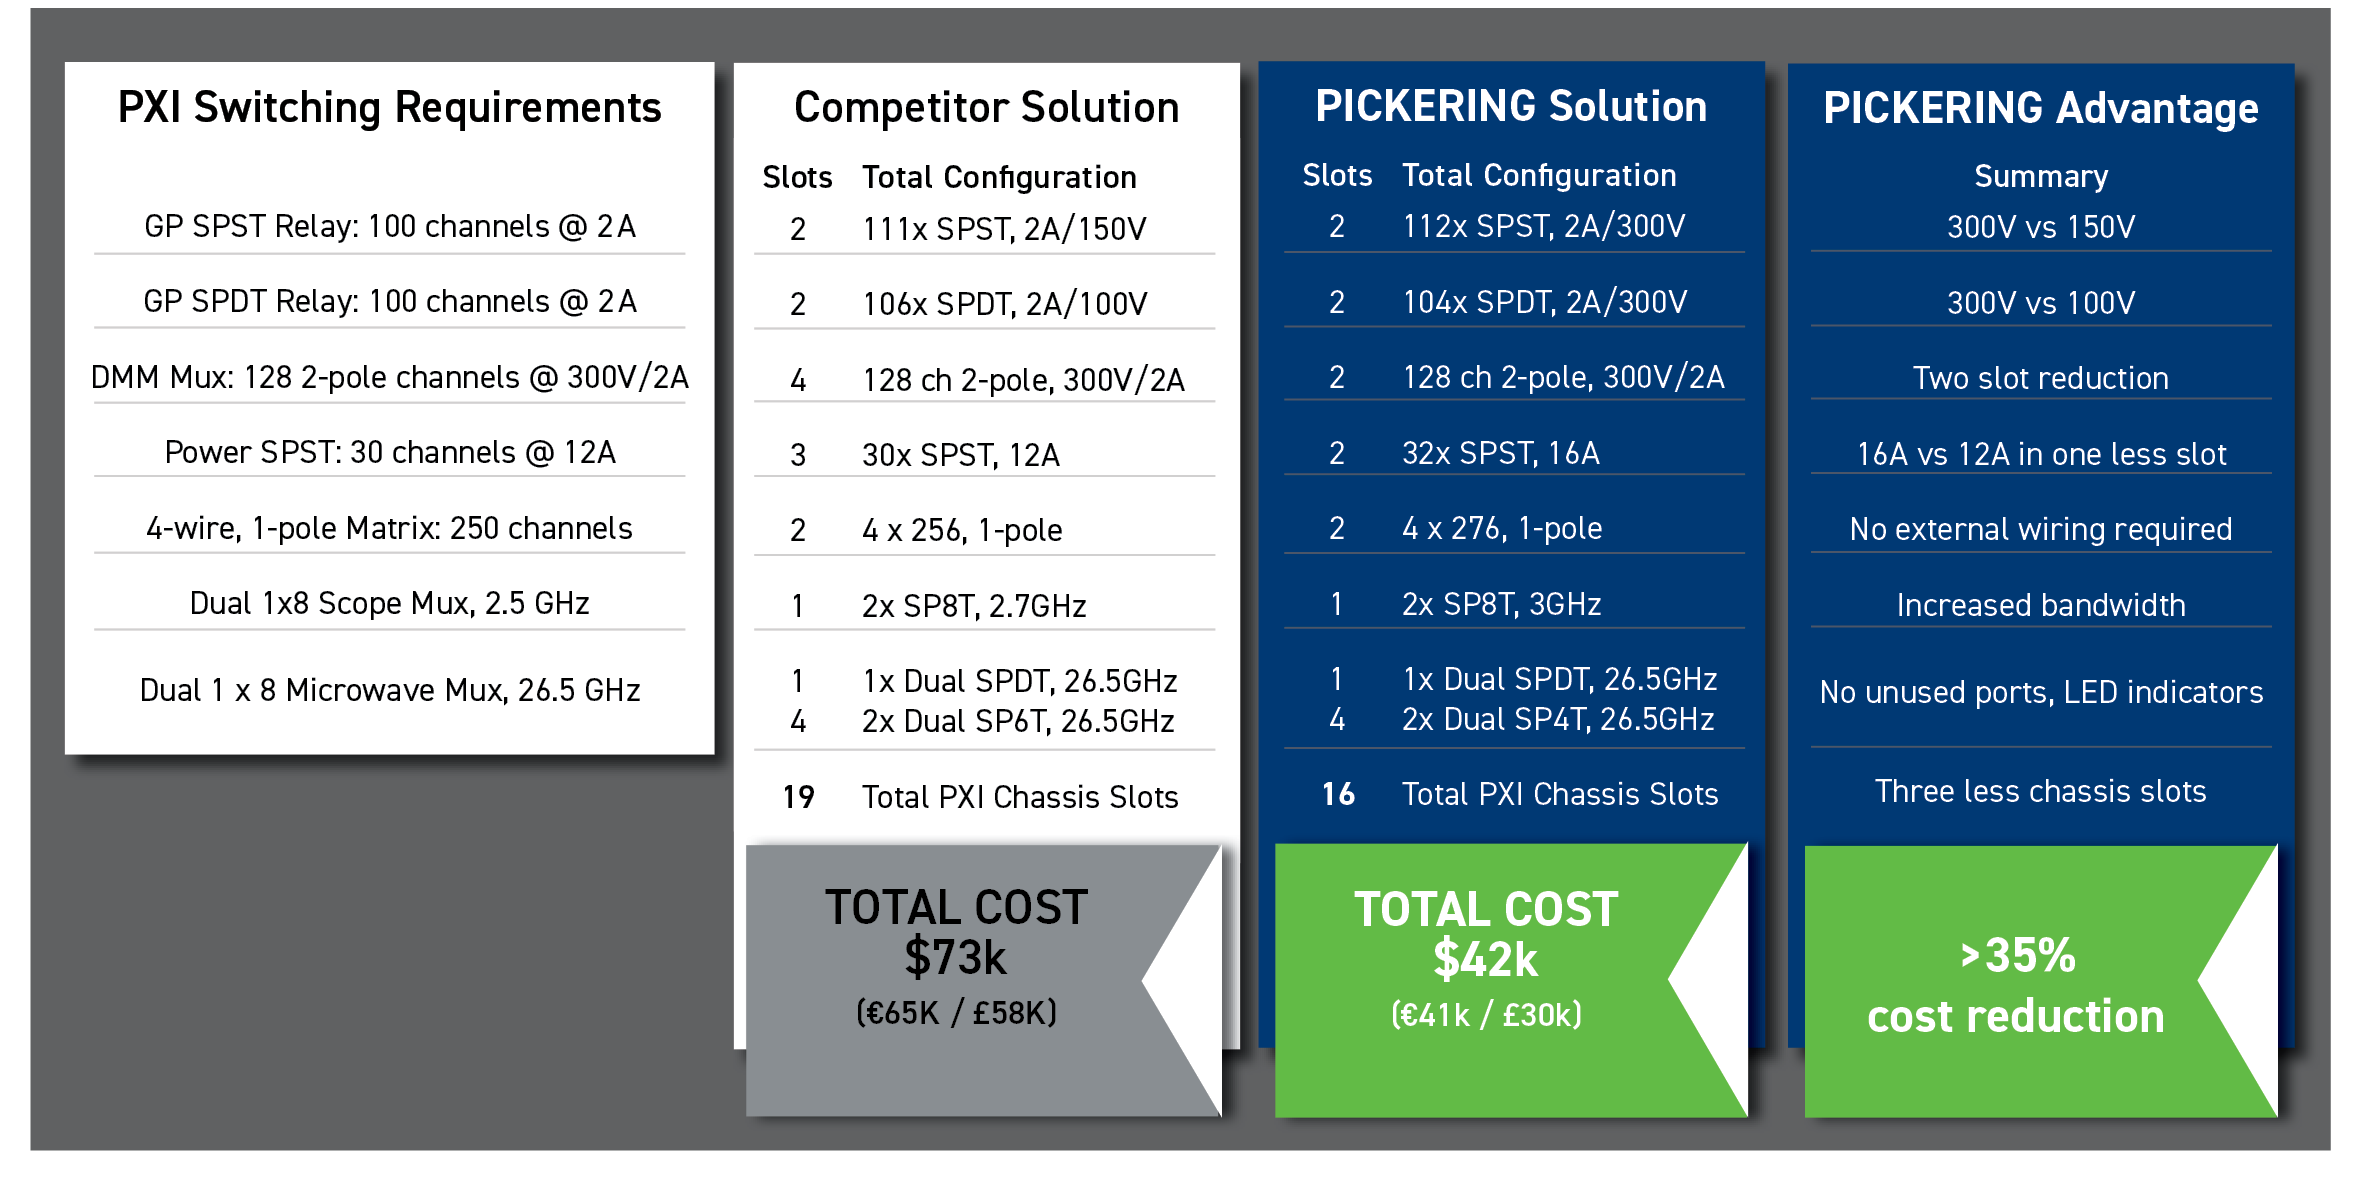 Pickering product's savings chart compared to main competitor